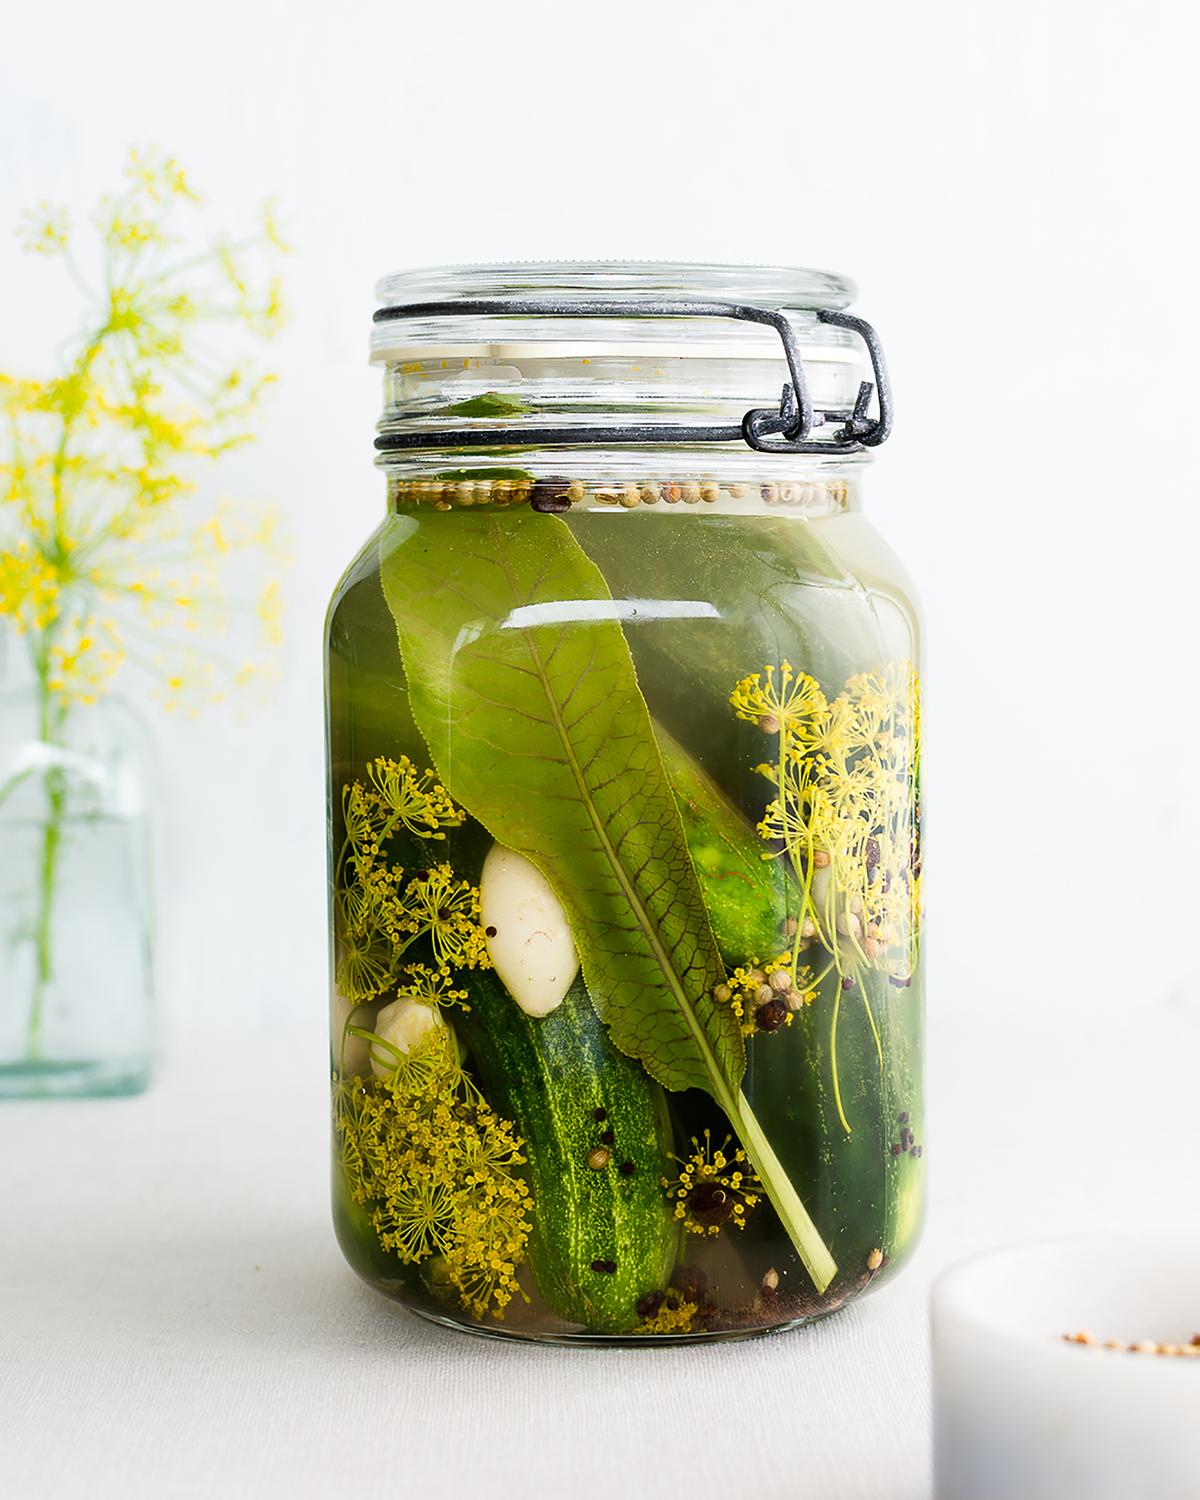 These fermented pickles are sharply sour and infused with the intense flavor of flowering dill and garlic. (Jennifer McGruther/NourishedKitchen.com)